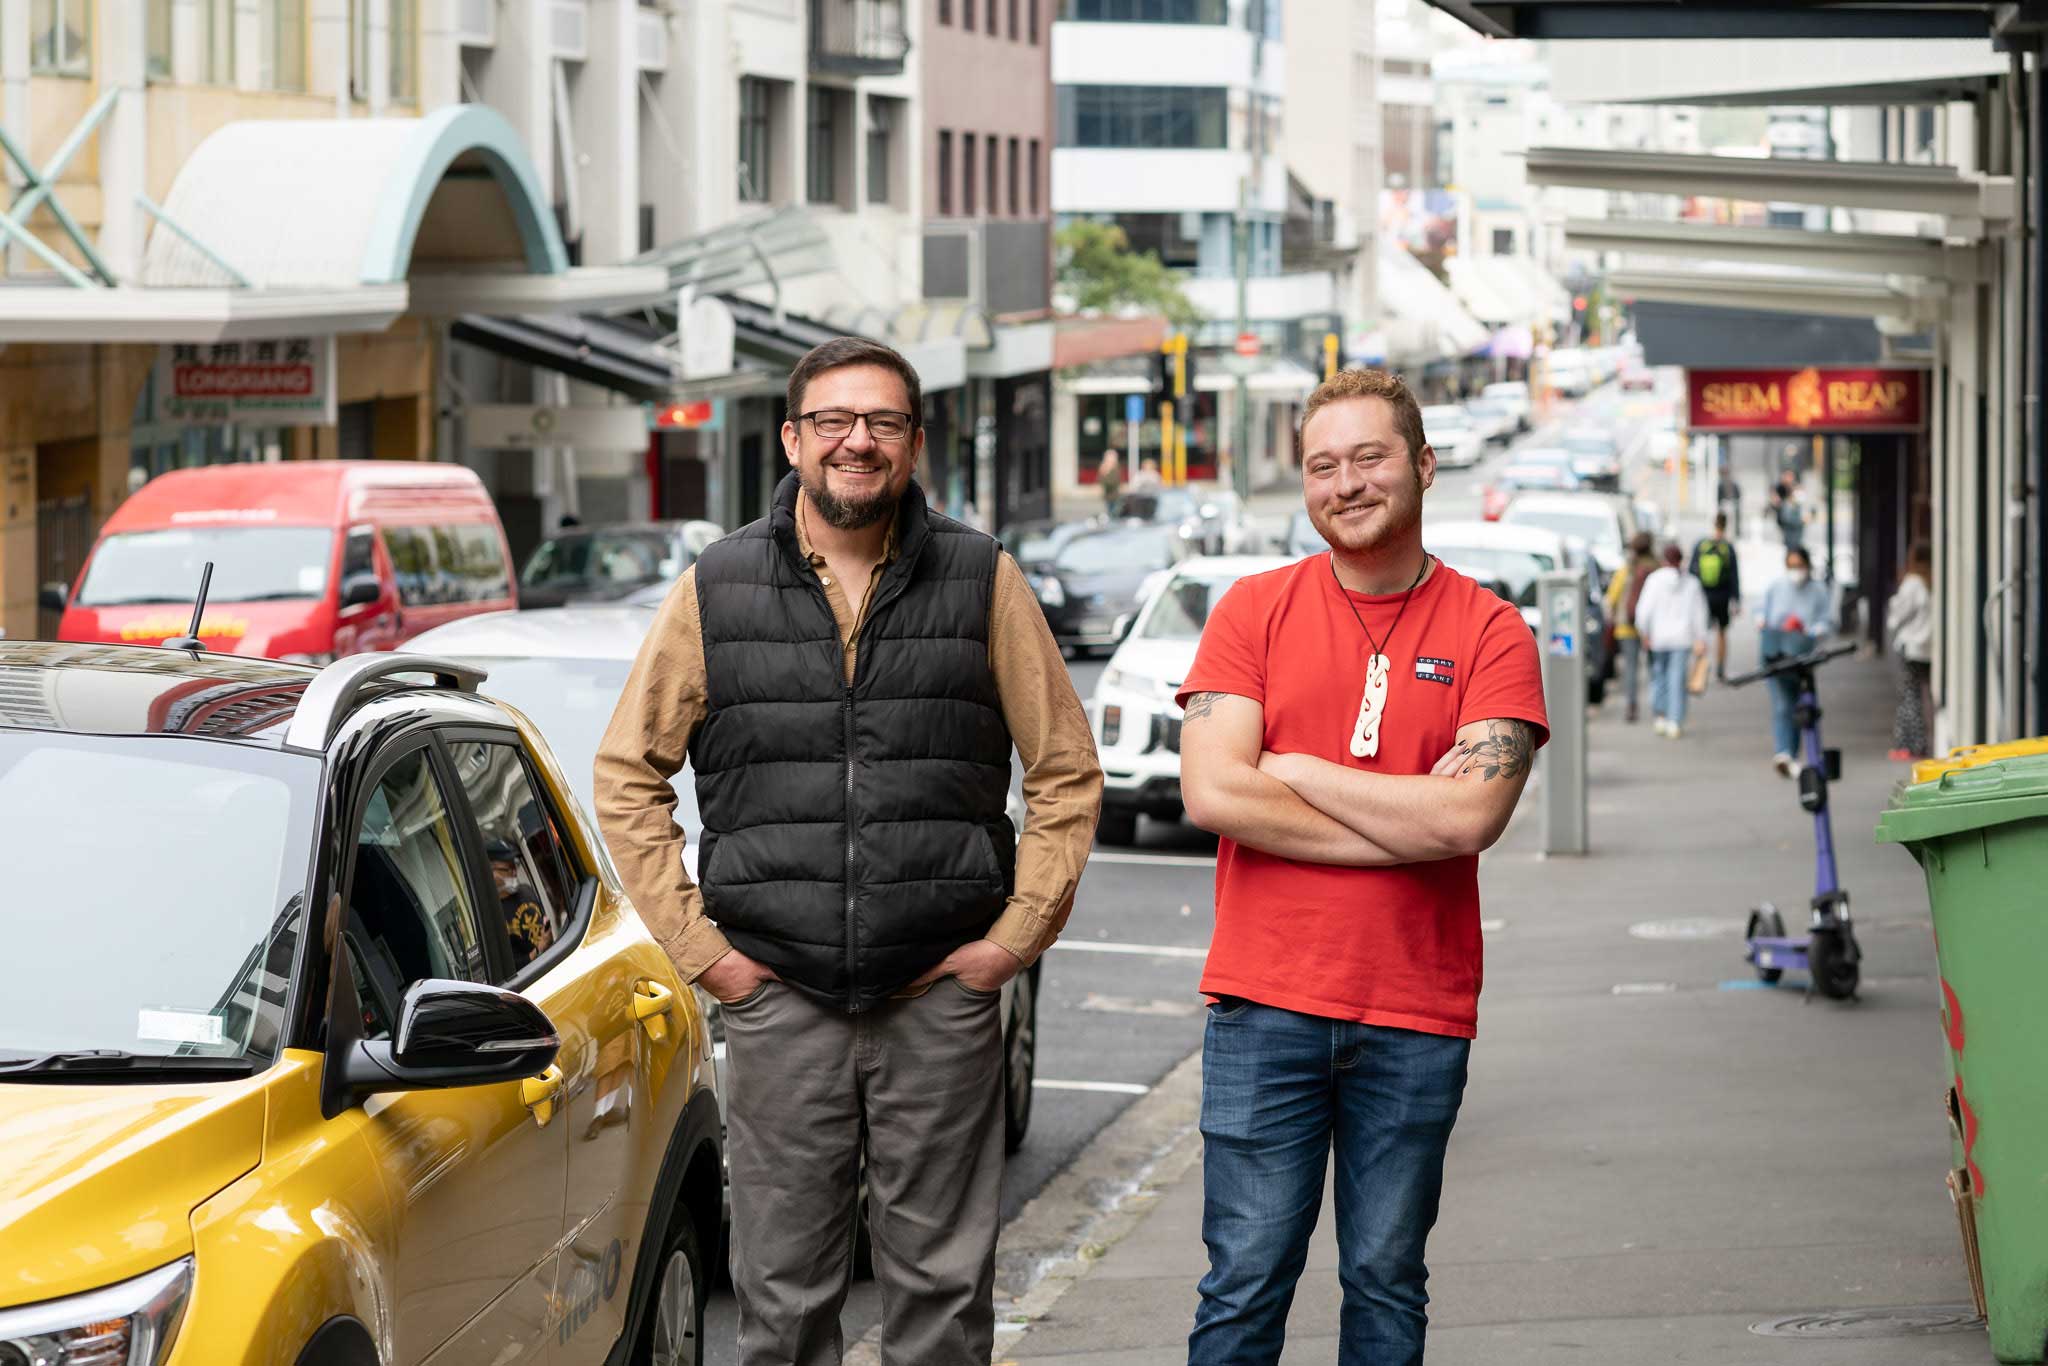 Jason and his partner standing in front of a Mevo vehicle in Central Wellington.